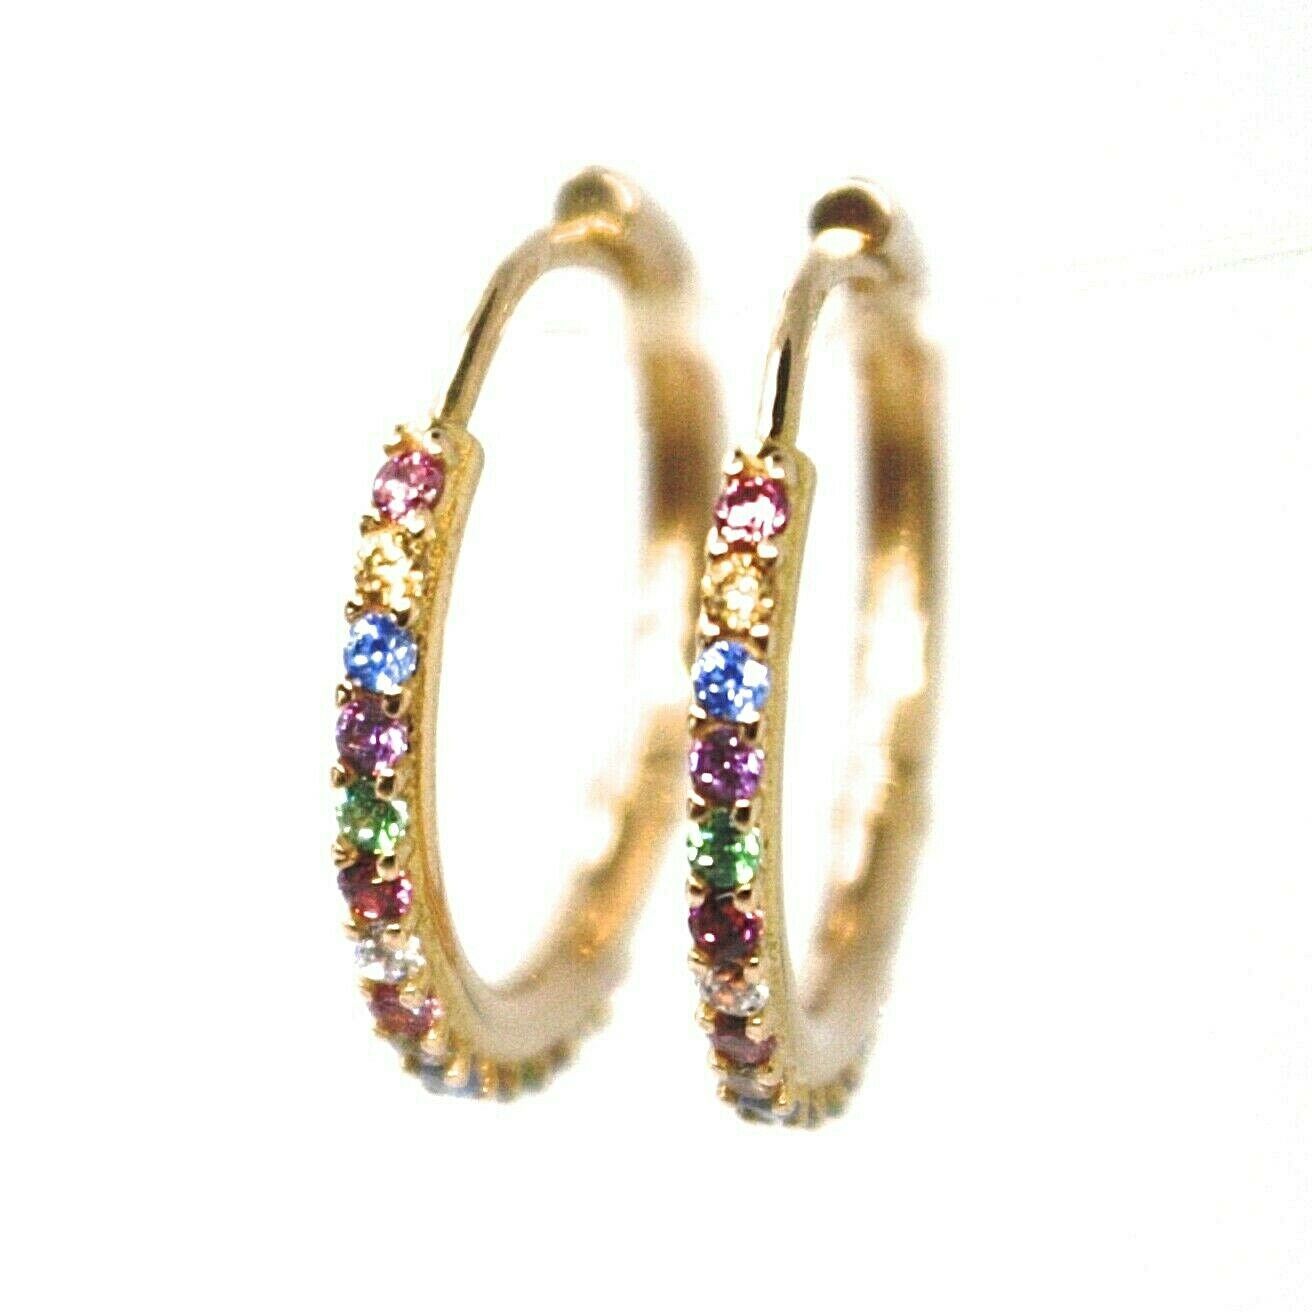 18K ROSE GOLD HOOPS EARRINGS, CUBIC ZIRCONIA MULTI COLOR, 20mm, 0.8 inches - $540.52